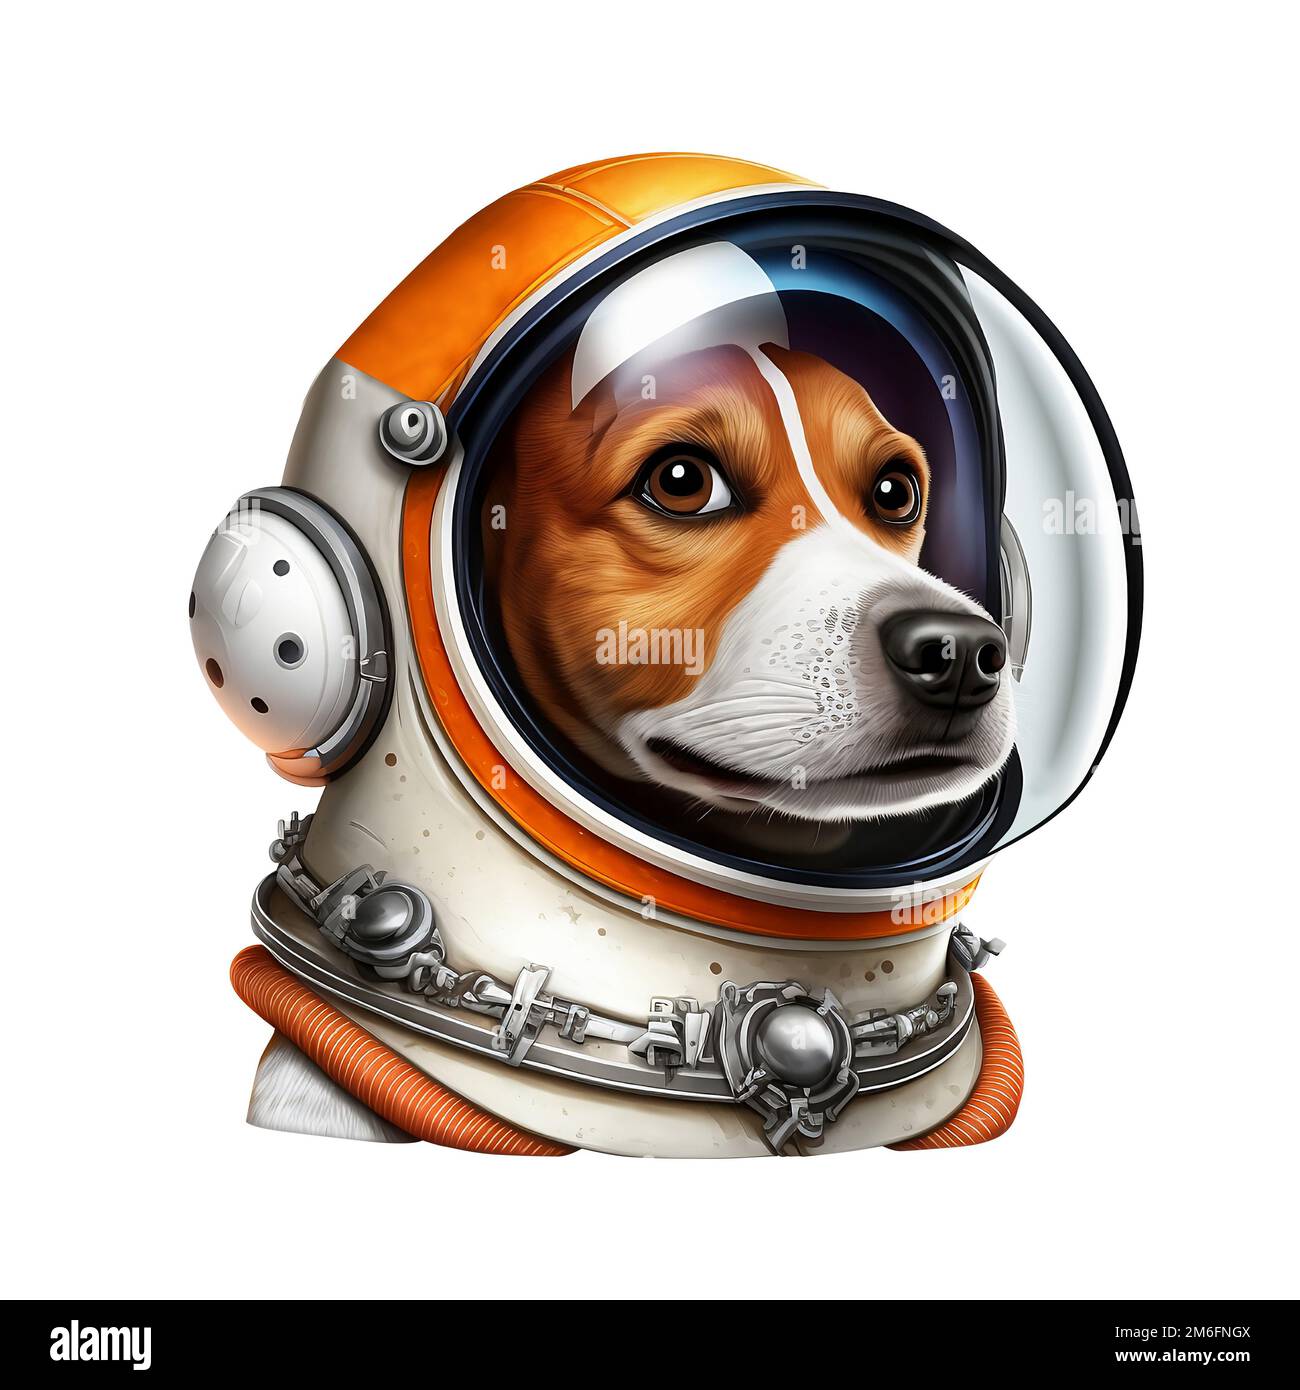 Leïka - first living being in space - dog in cosmonaut suit - illustration Stock Photo